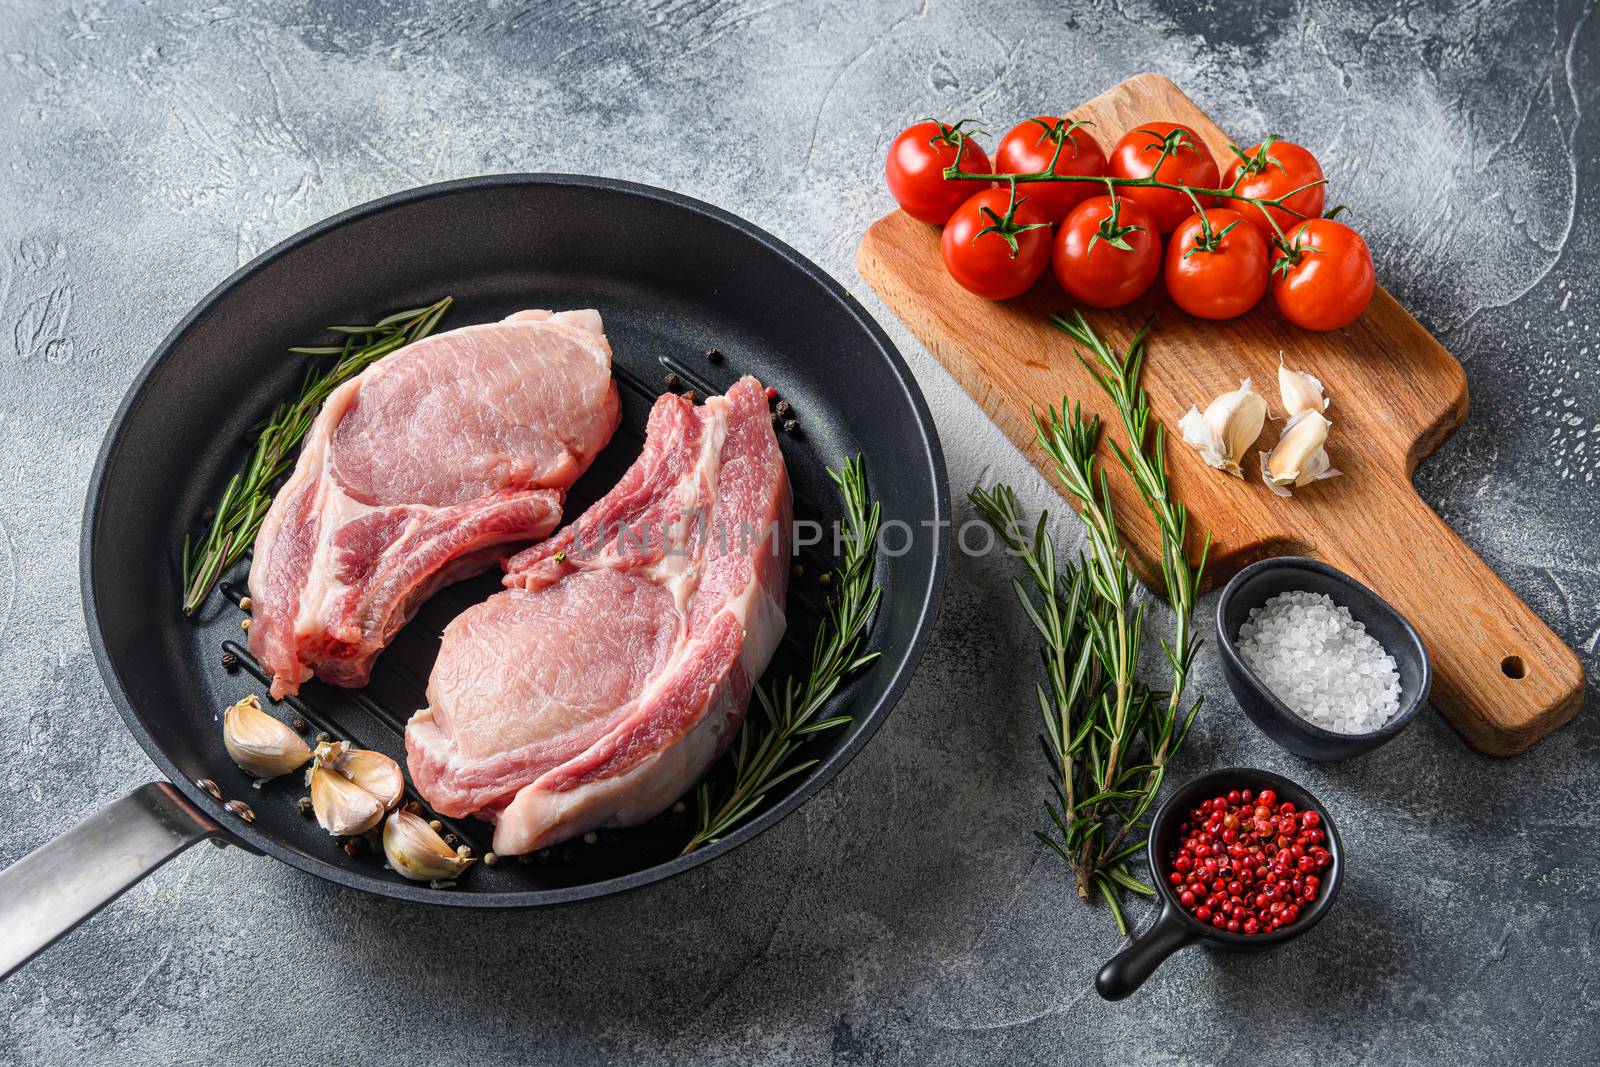 Pork chop on a bone in a black frying grill pan on a grey textured stone background with black cloth rosemary garlic peppercorns and tomatoes on chopping board ingredients side view .